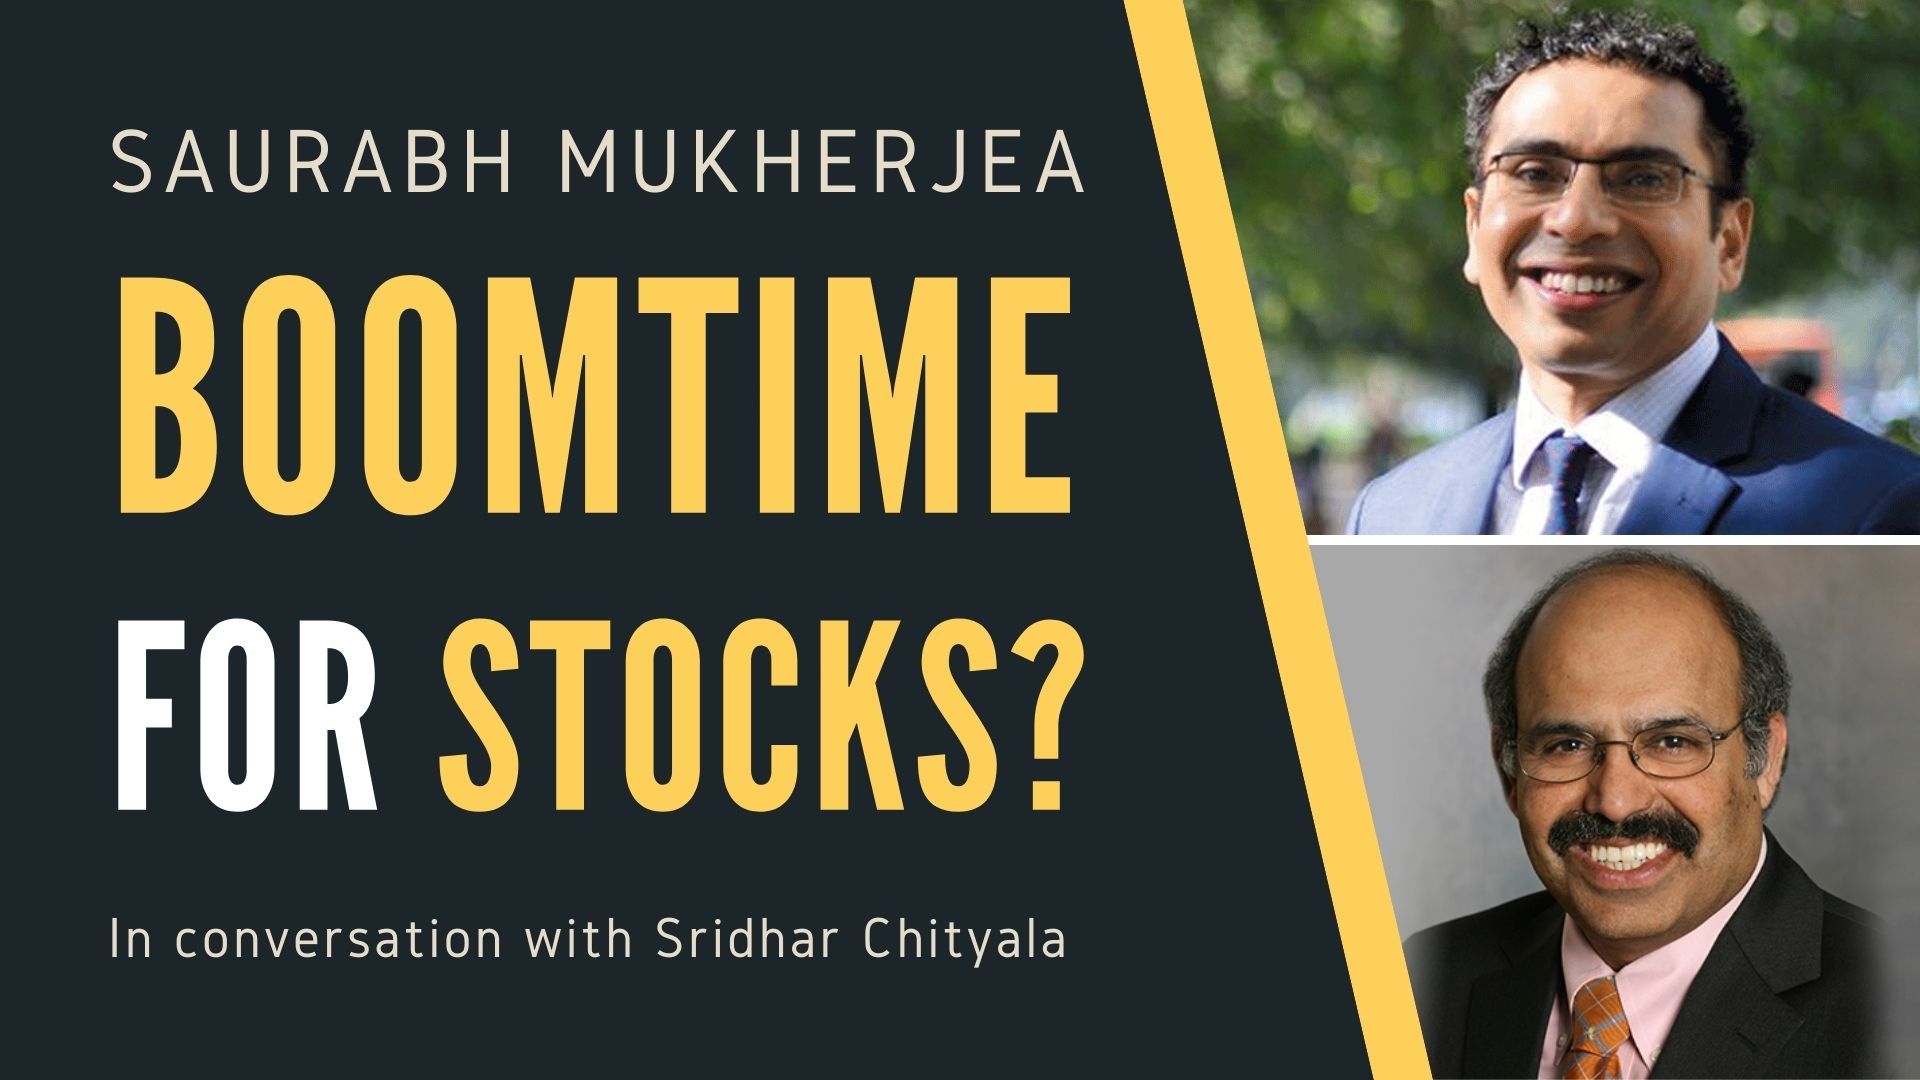 Recession-proof. Pandemic proof. Stocks that grow regardless of the state of the Indian Economy. Saurabh Mukherjea details stocks in the Indian Stock Market that has made unheard-of profits for its investors. Analyzing these stocks provides entrepreneurs with what to look for while starting new ventures. A must-watch!